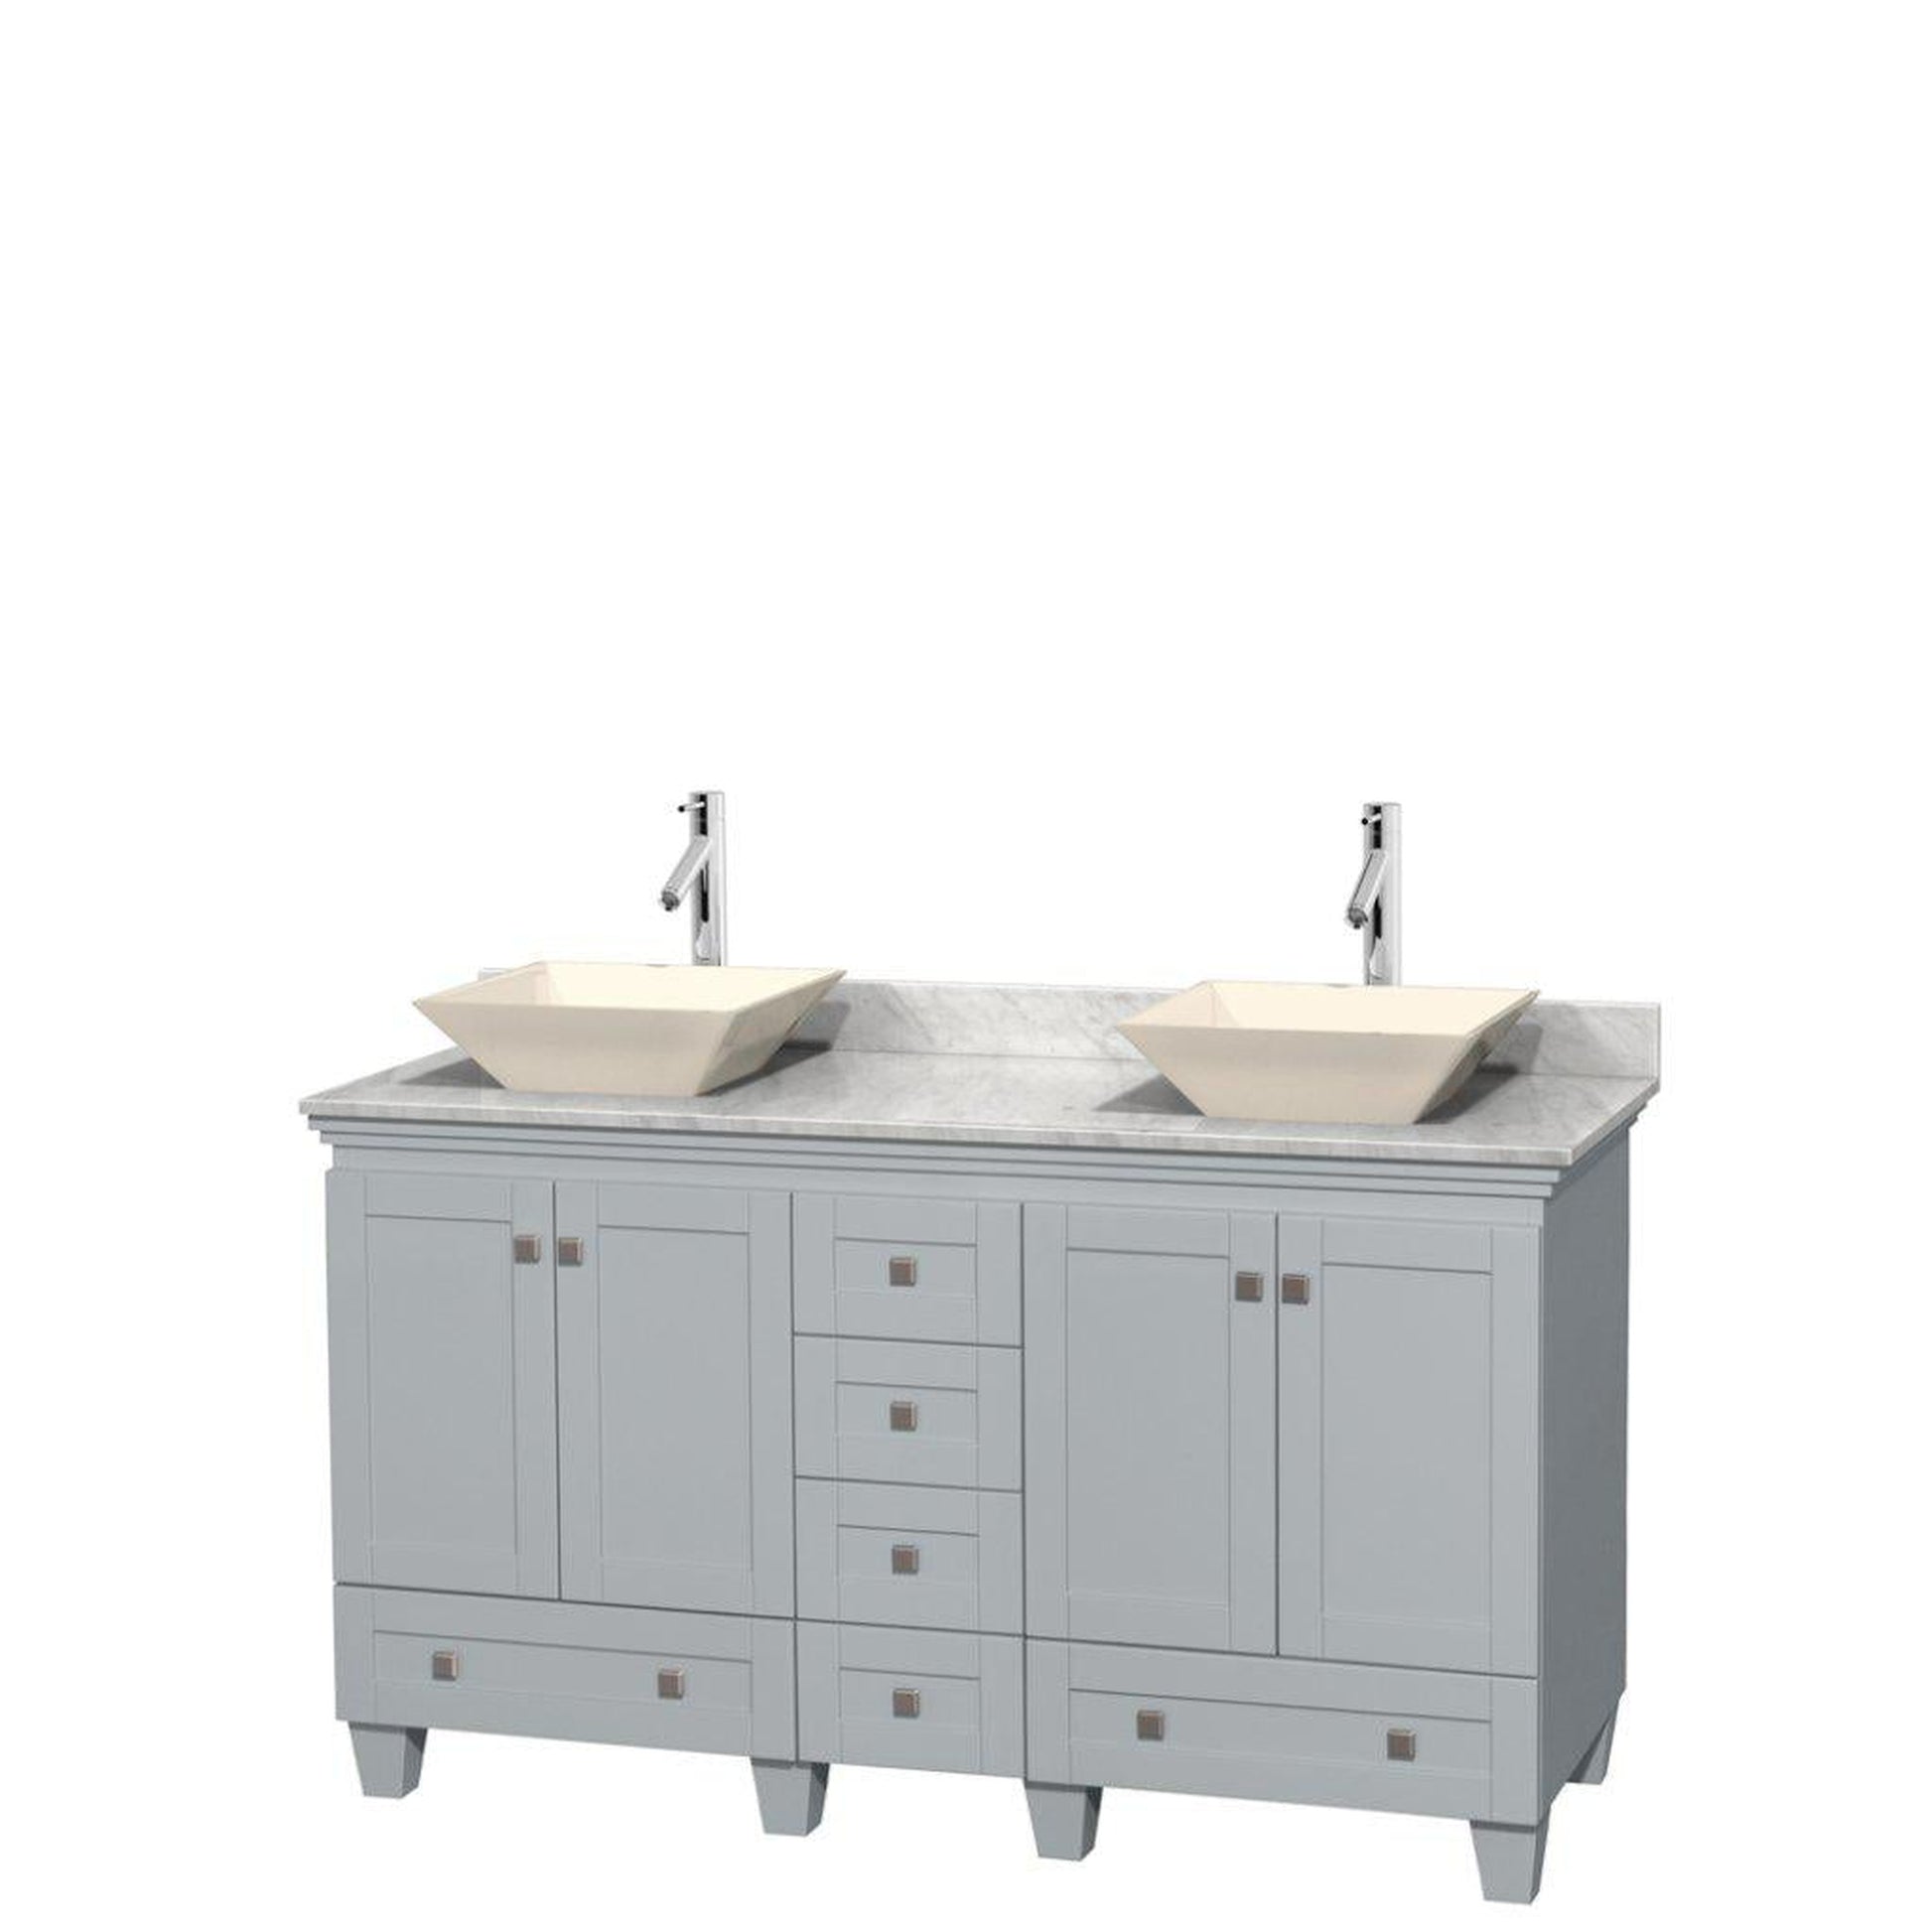 Wyndham Collection Acclaim 60" Double Bathroom Oyster Gray Vanity With White Carrara Marble Countertop And Pyra Bone Porcelain Sinks